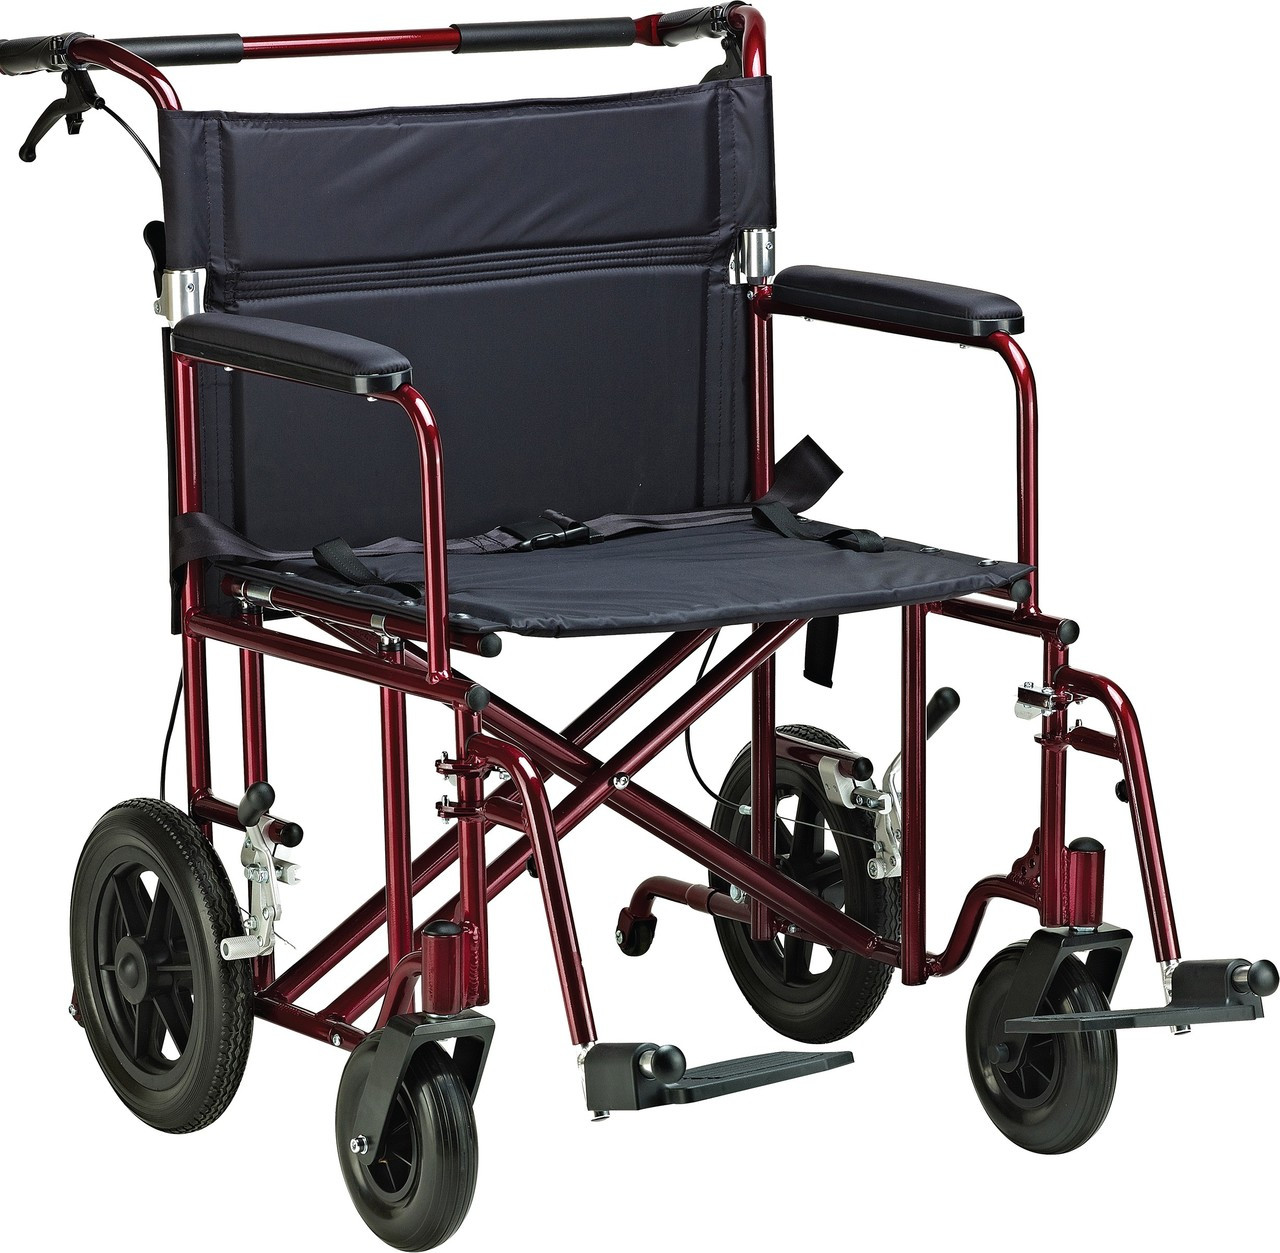 Drive Medical ATC22-R 22" Bariatric Transport Wheelchair,450 lbs. Weight Capacity Full Length, Fixed Height, Padded Black